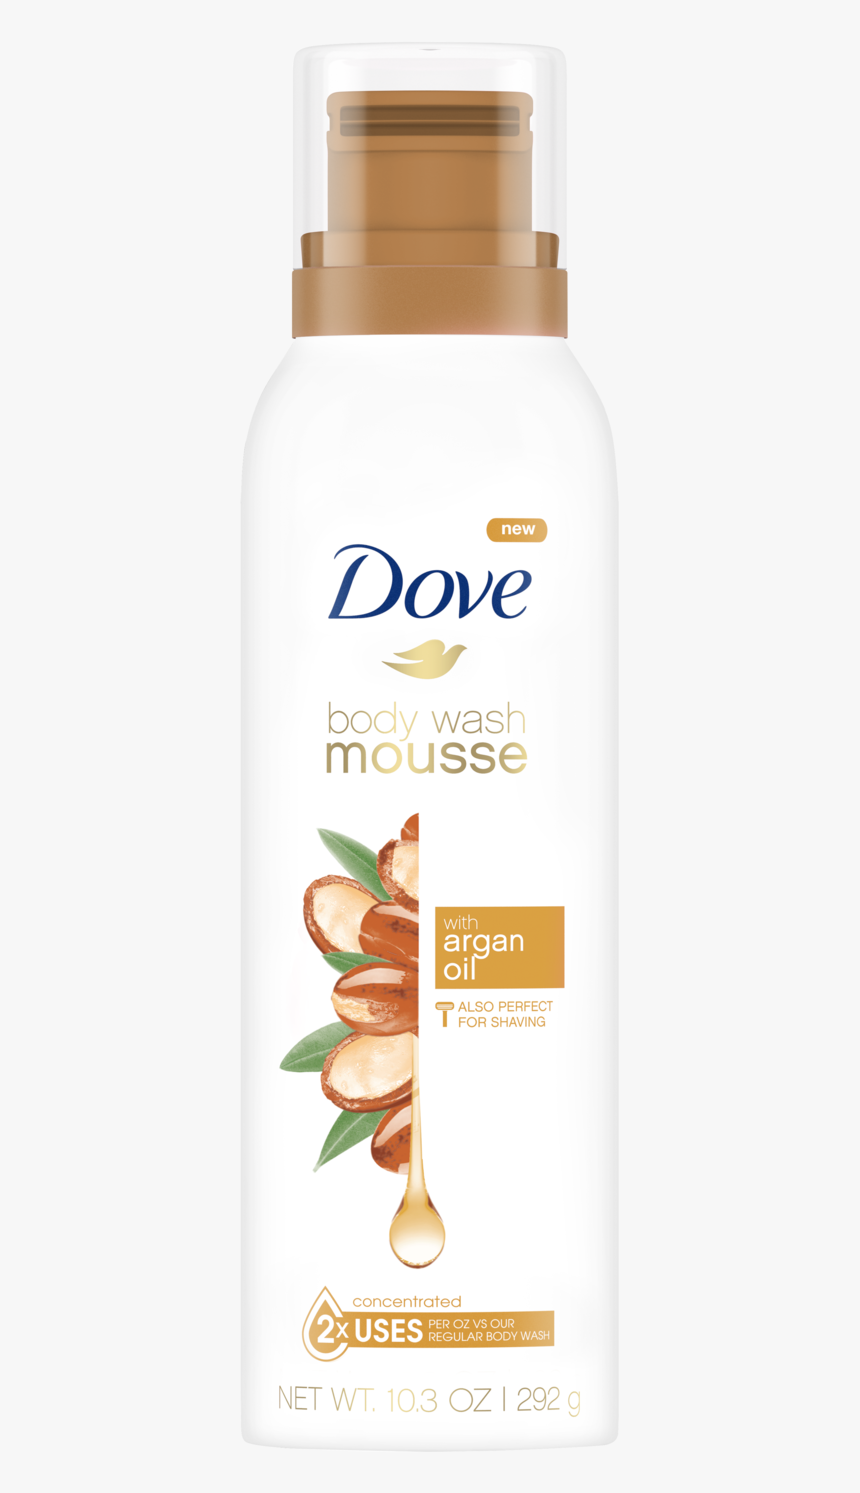 Body Wash Mousse With Argan Oil - Dove Body Wash Mousse, HD Png Download, Free Download